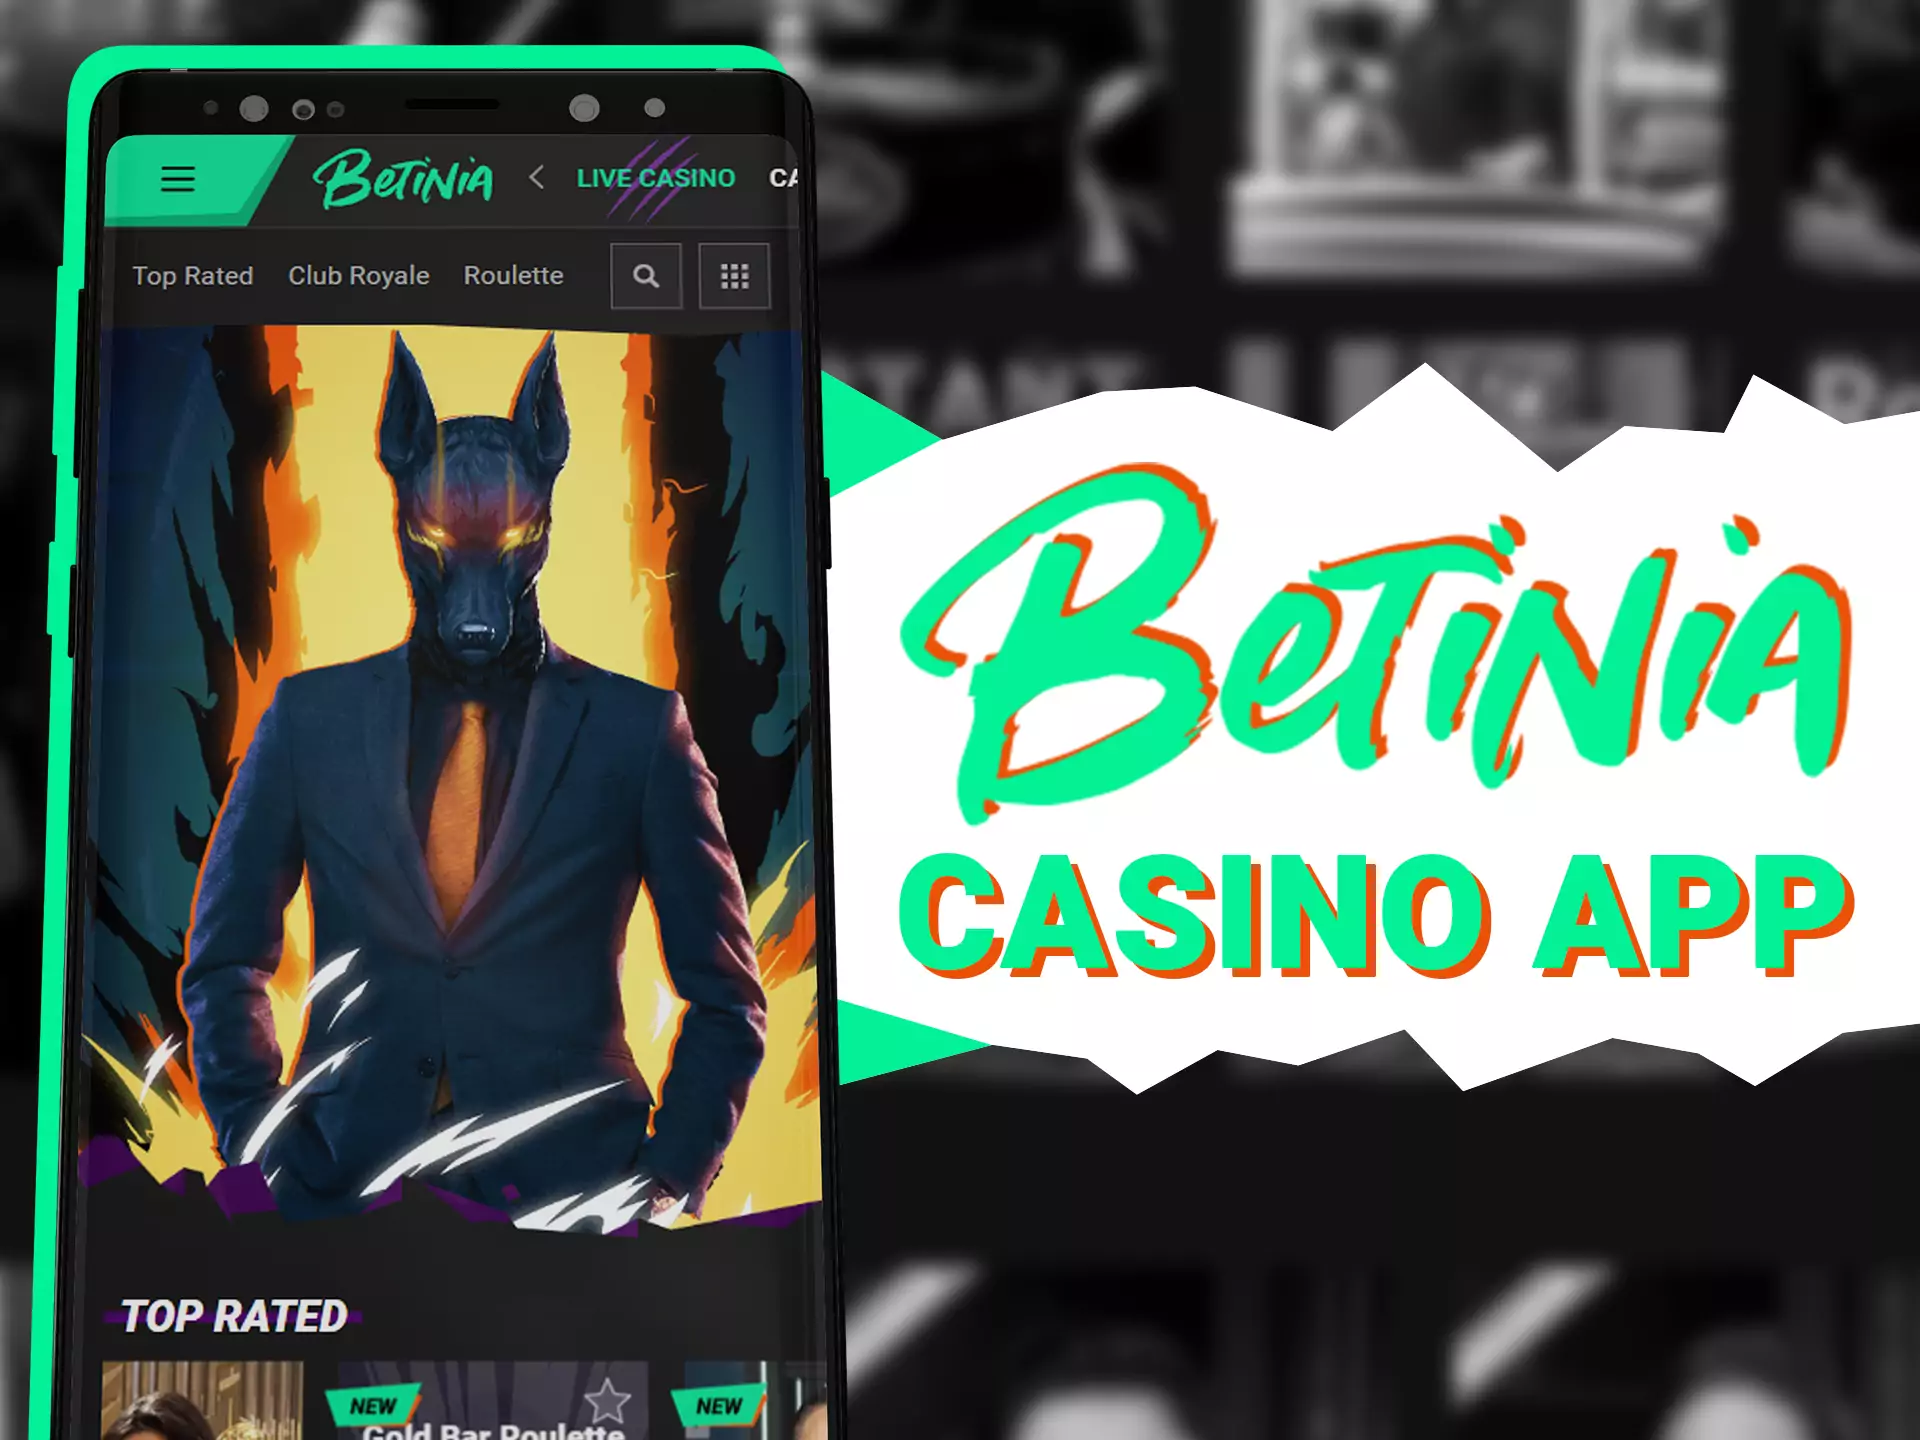 Play casino games with joy and comfort with Betinia app.